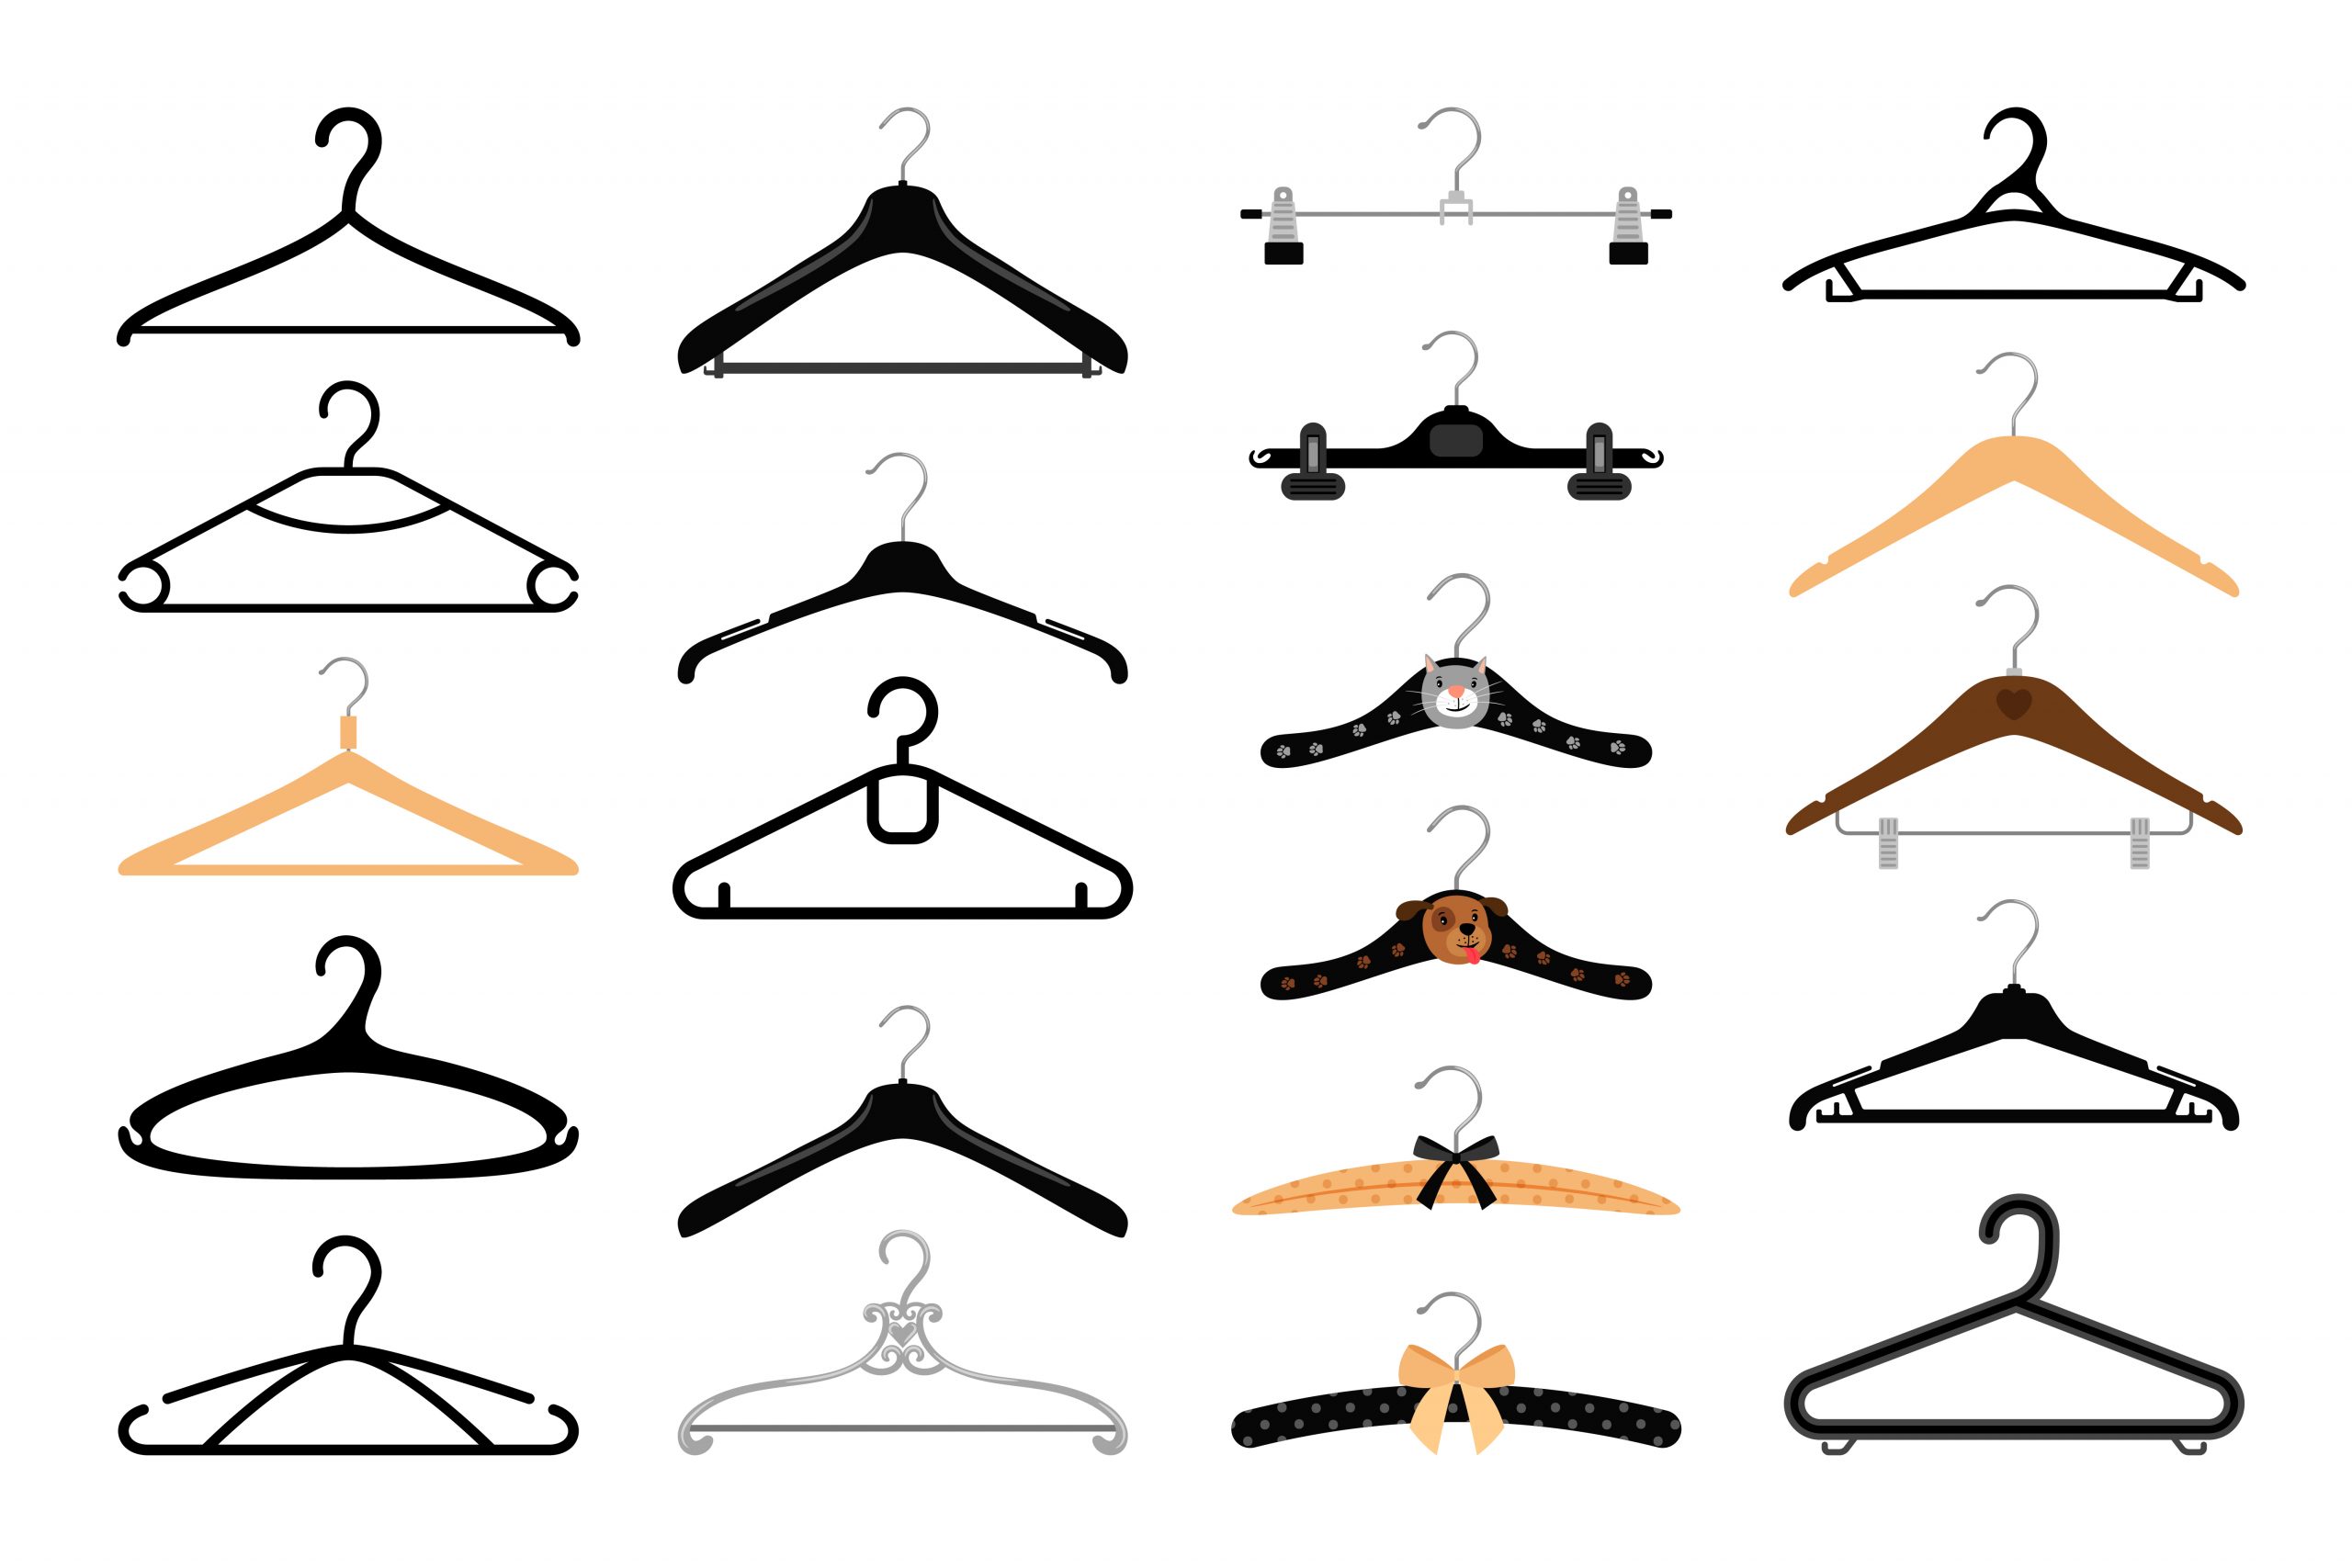 https://sparkoncept.com/wp-content/uploads/2021/03/Are-Plastic-Hangers-Recyclable-1-scaled.jpg